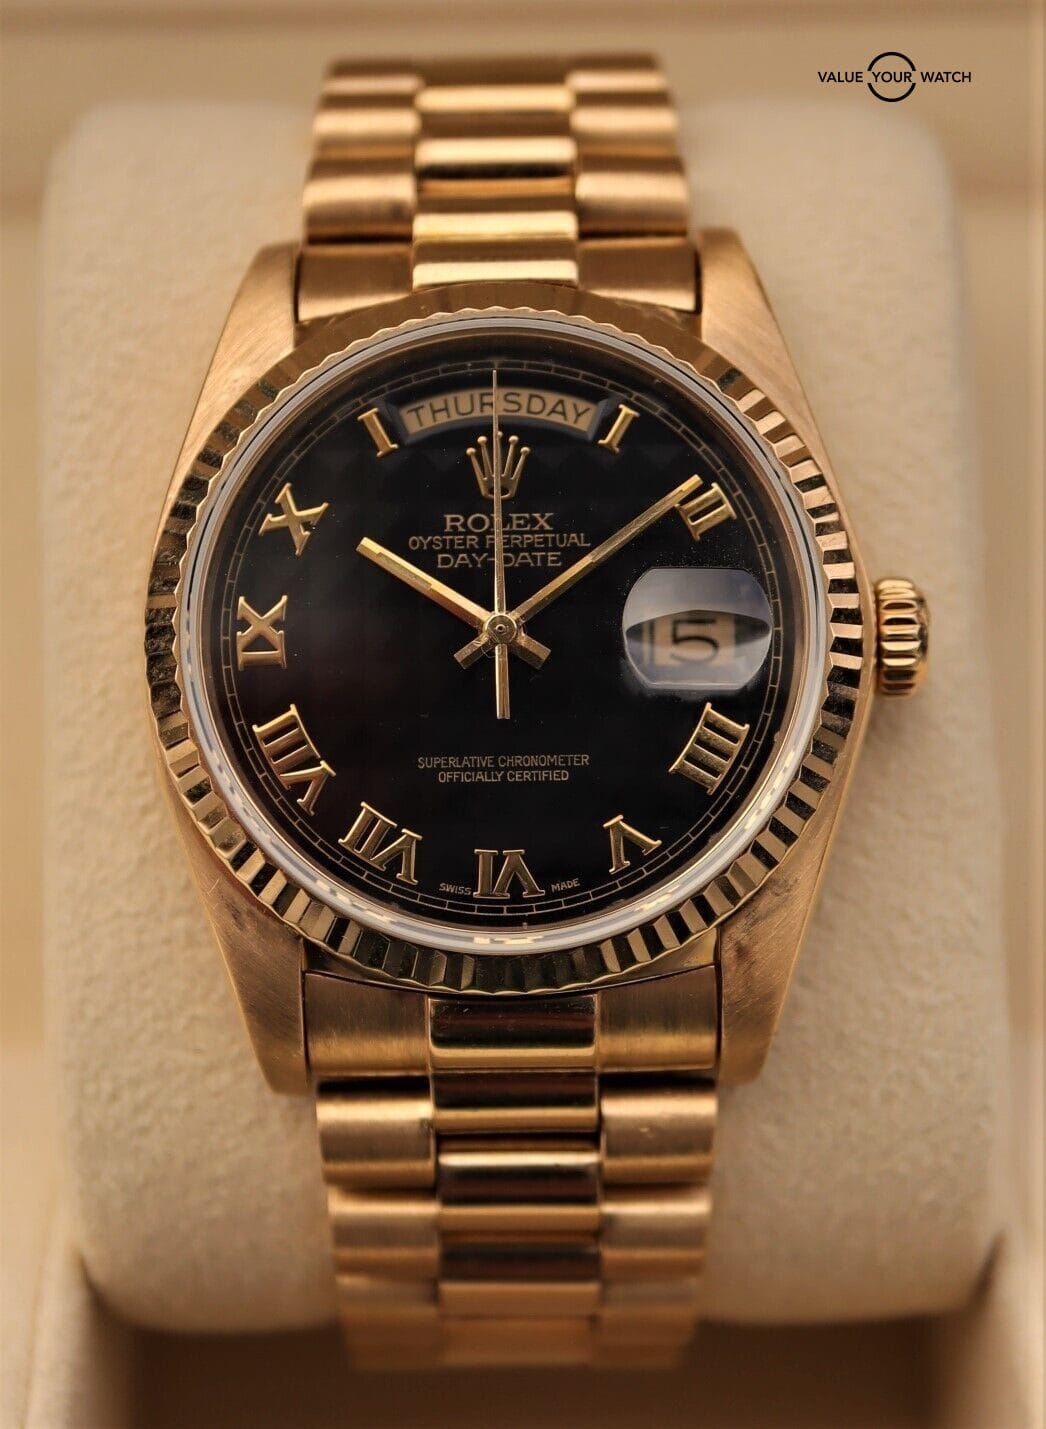 Rolex President Day-Date 18038 18K Yellow Gold Black Pyramid Dial! | Value Your